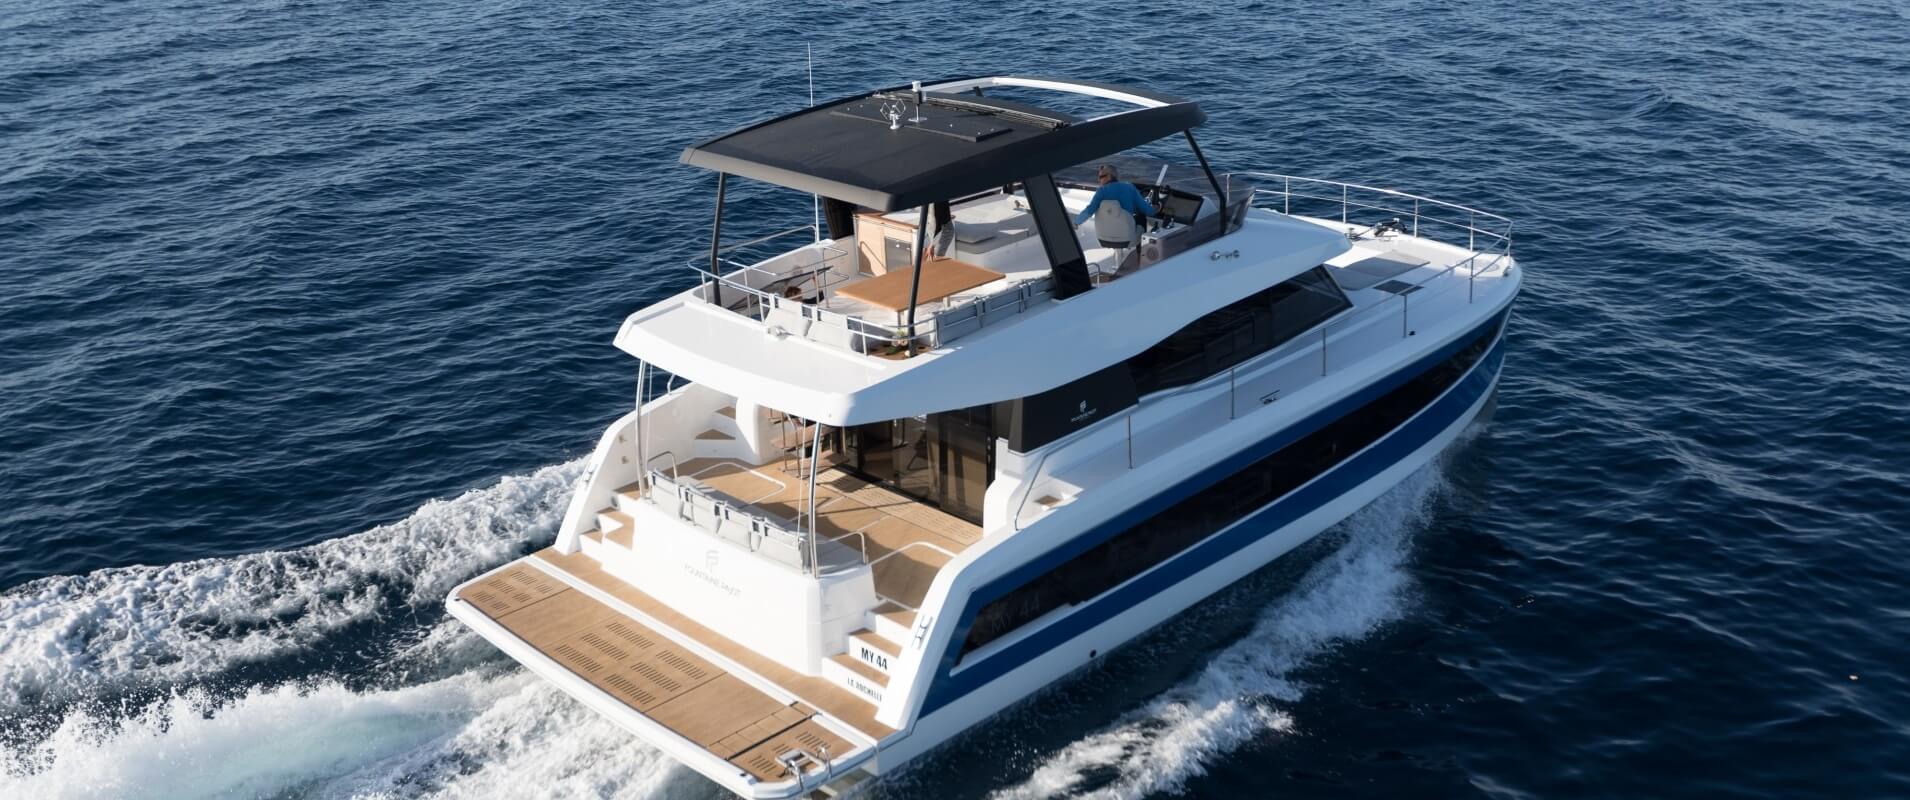 New Power Catamaran for Sale  MY 44 Boat Highlights